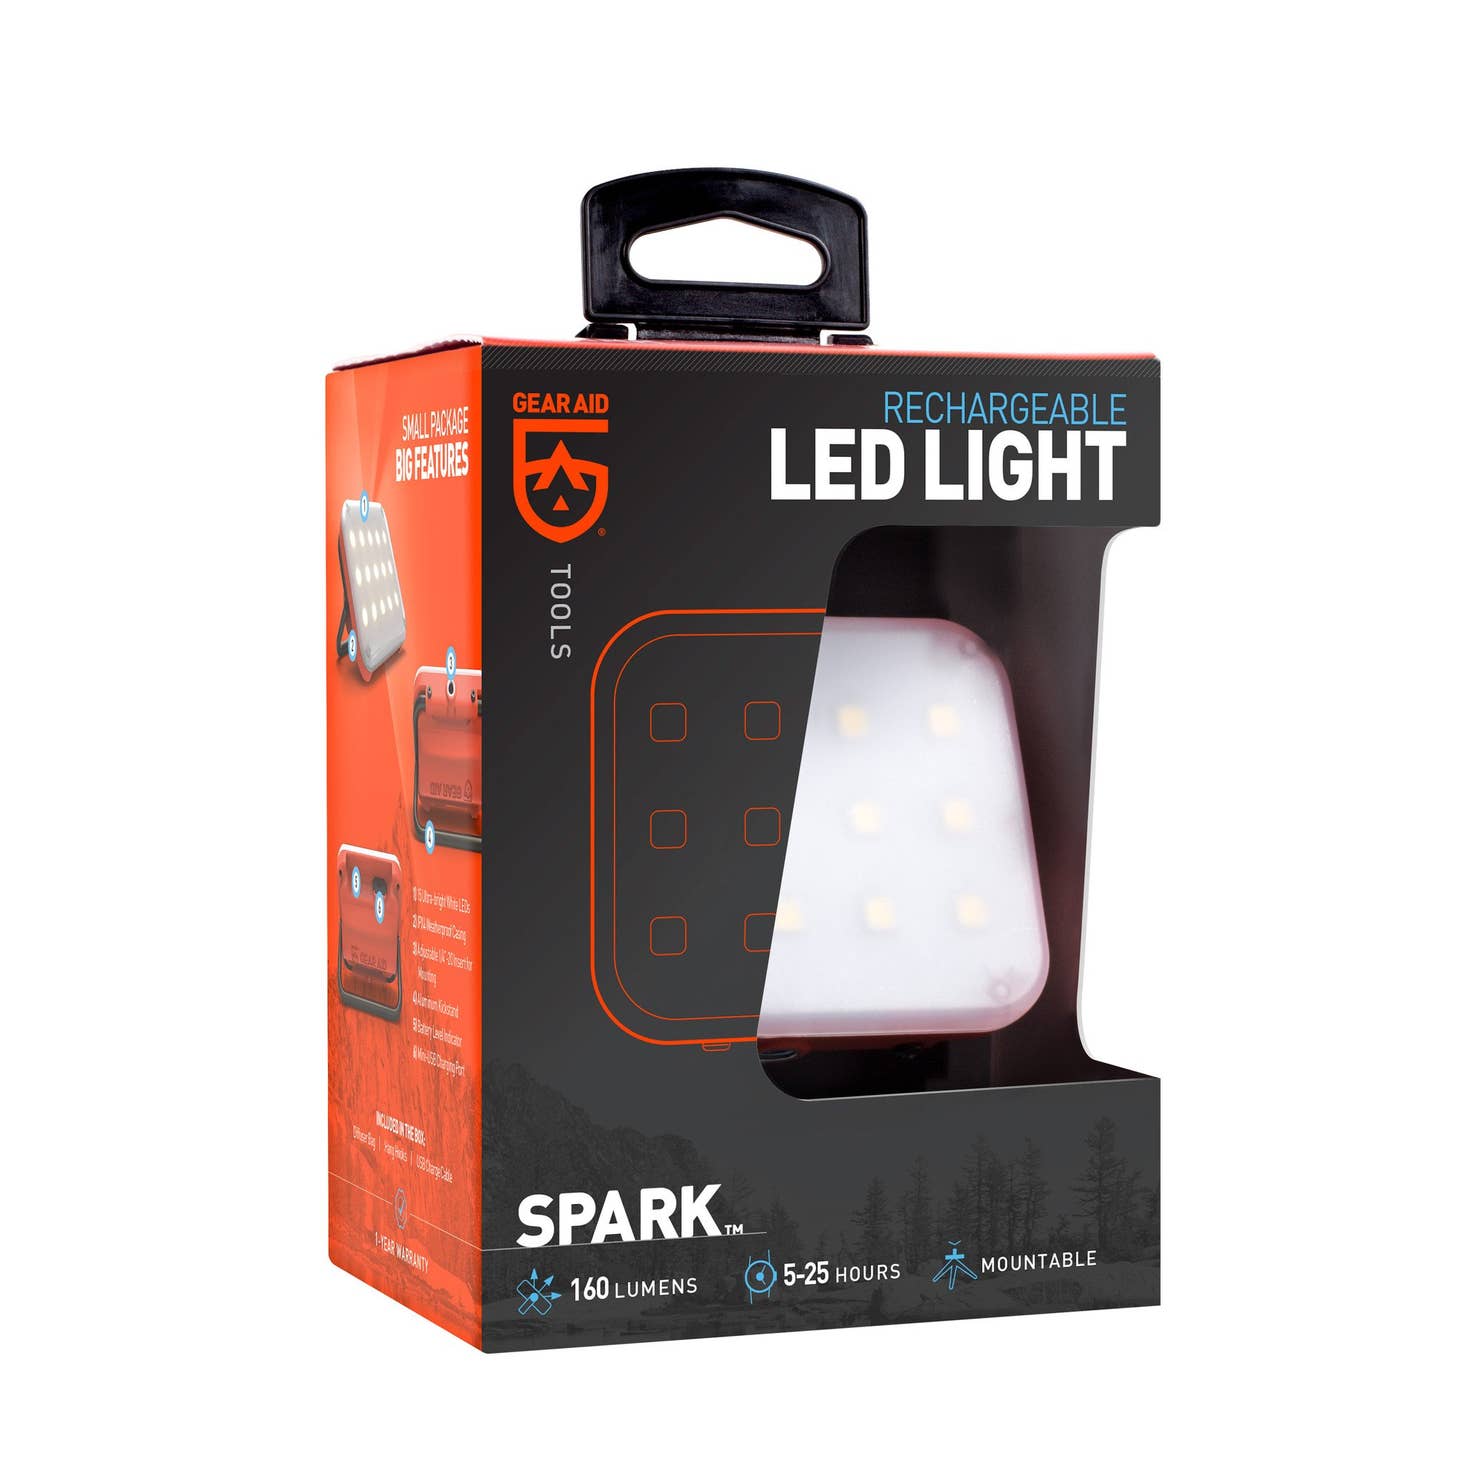 Rechargeable LED Light | Gear Aid